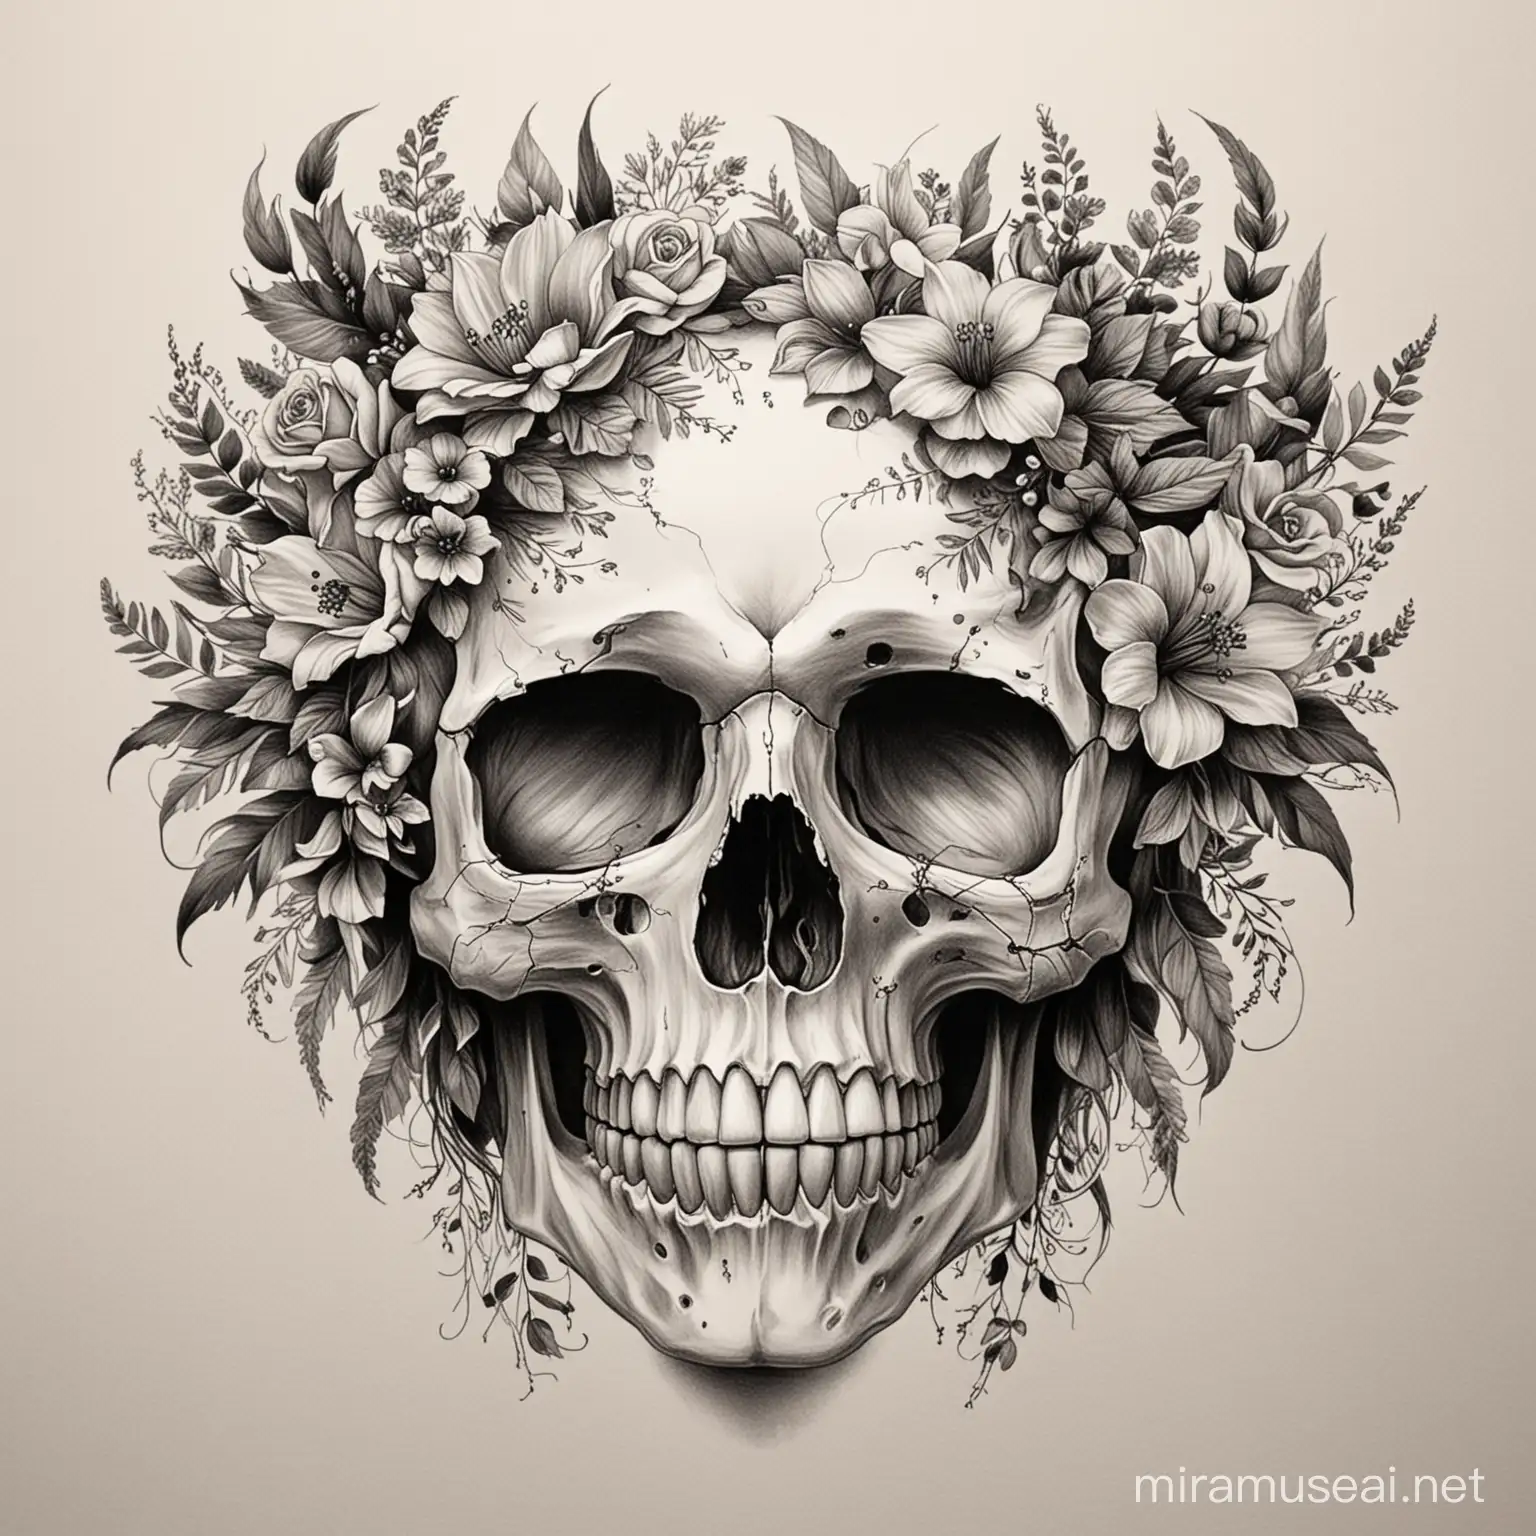 draw me a skull with flowers.